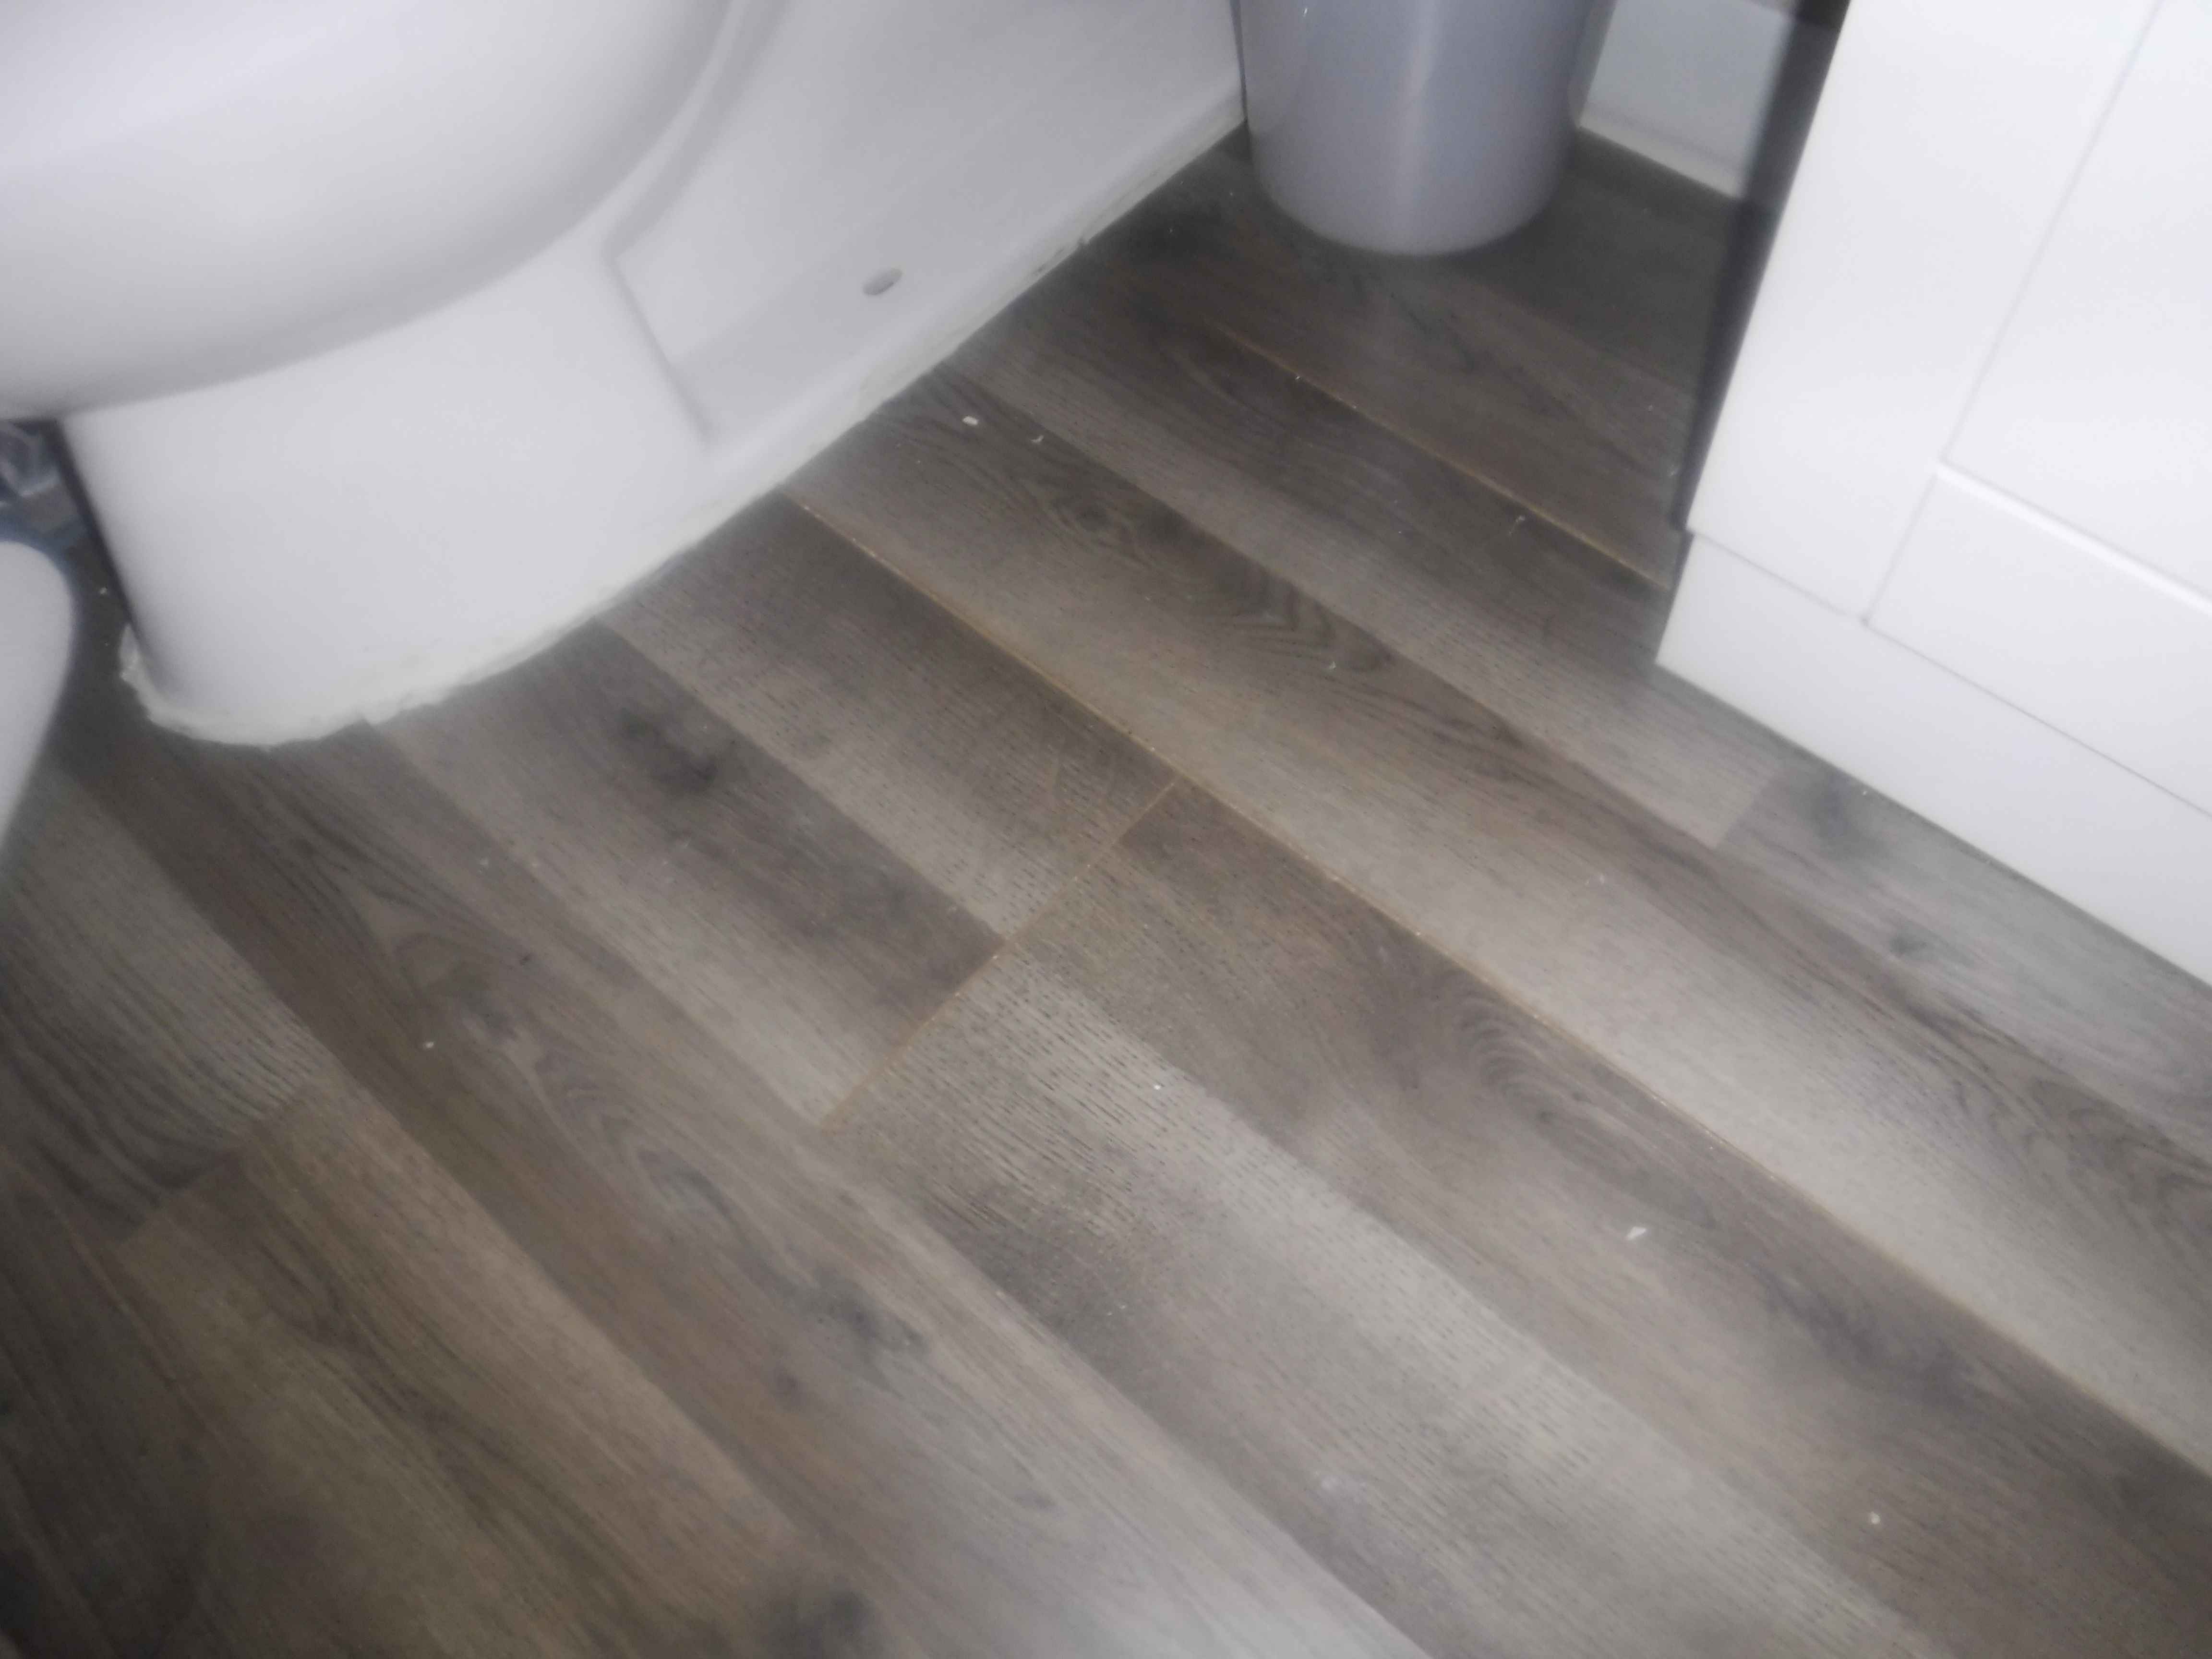 Poorly Installed laminate flooring with gaps. "Channahon Home Inspection"